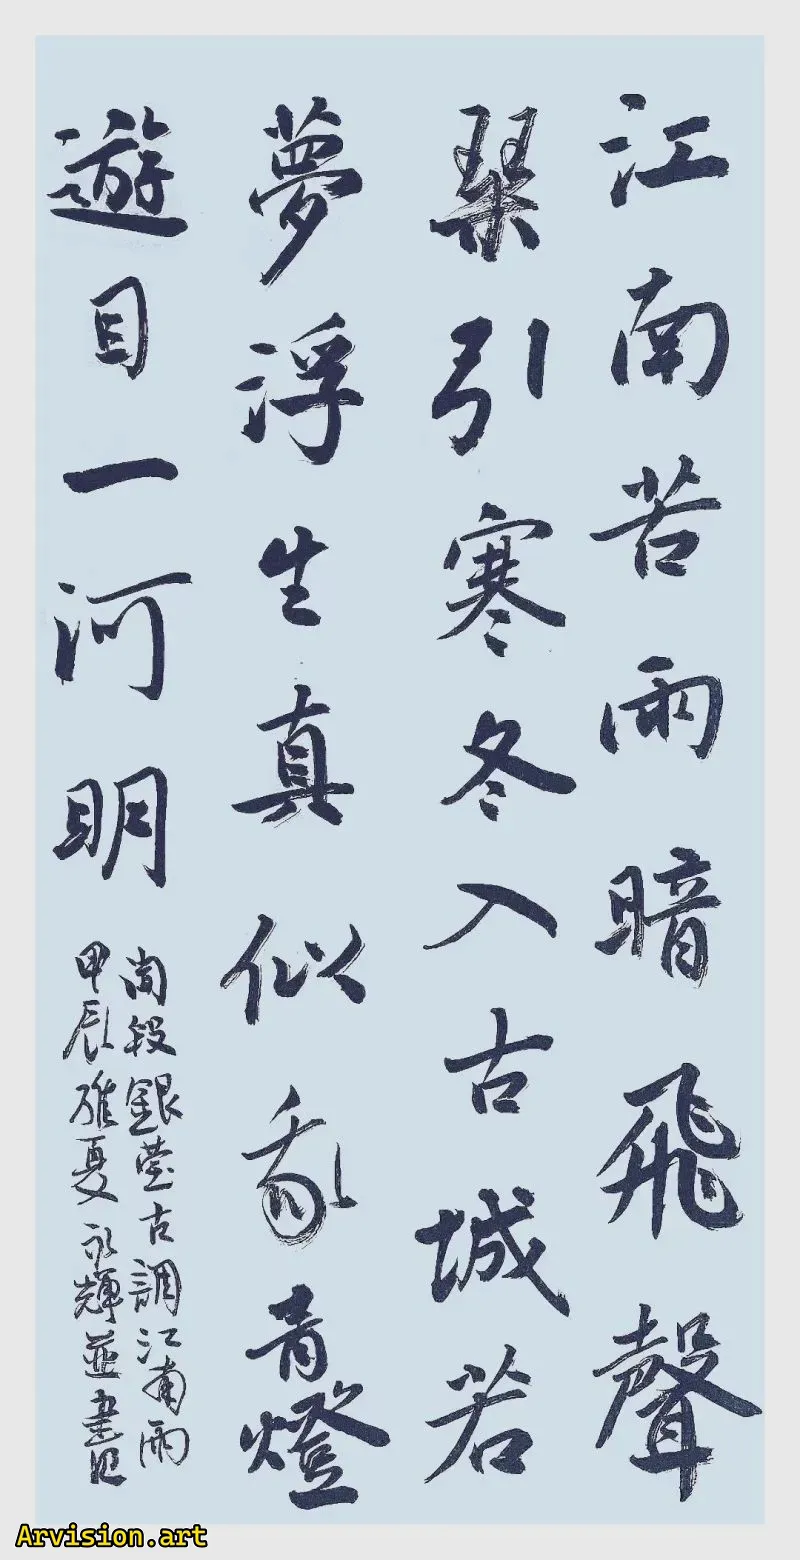 Song Yonghui's Calligraphy Works: The Sound of Flying Darkly in Jiangnan Like Rain